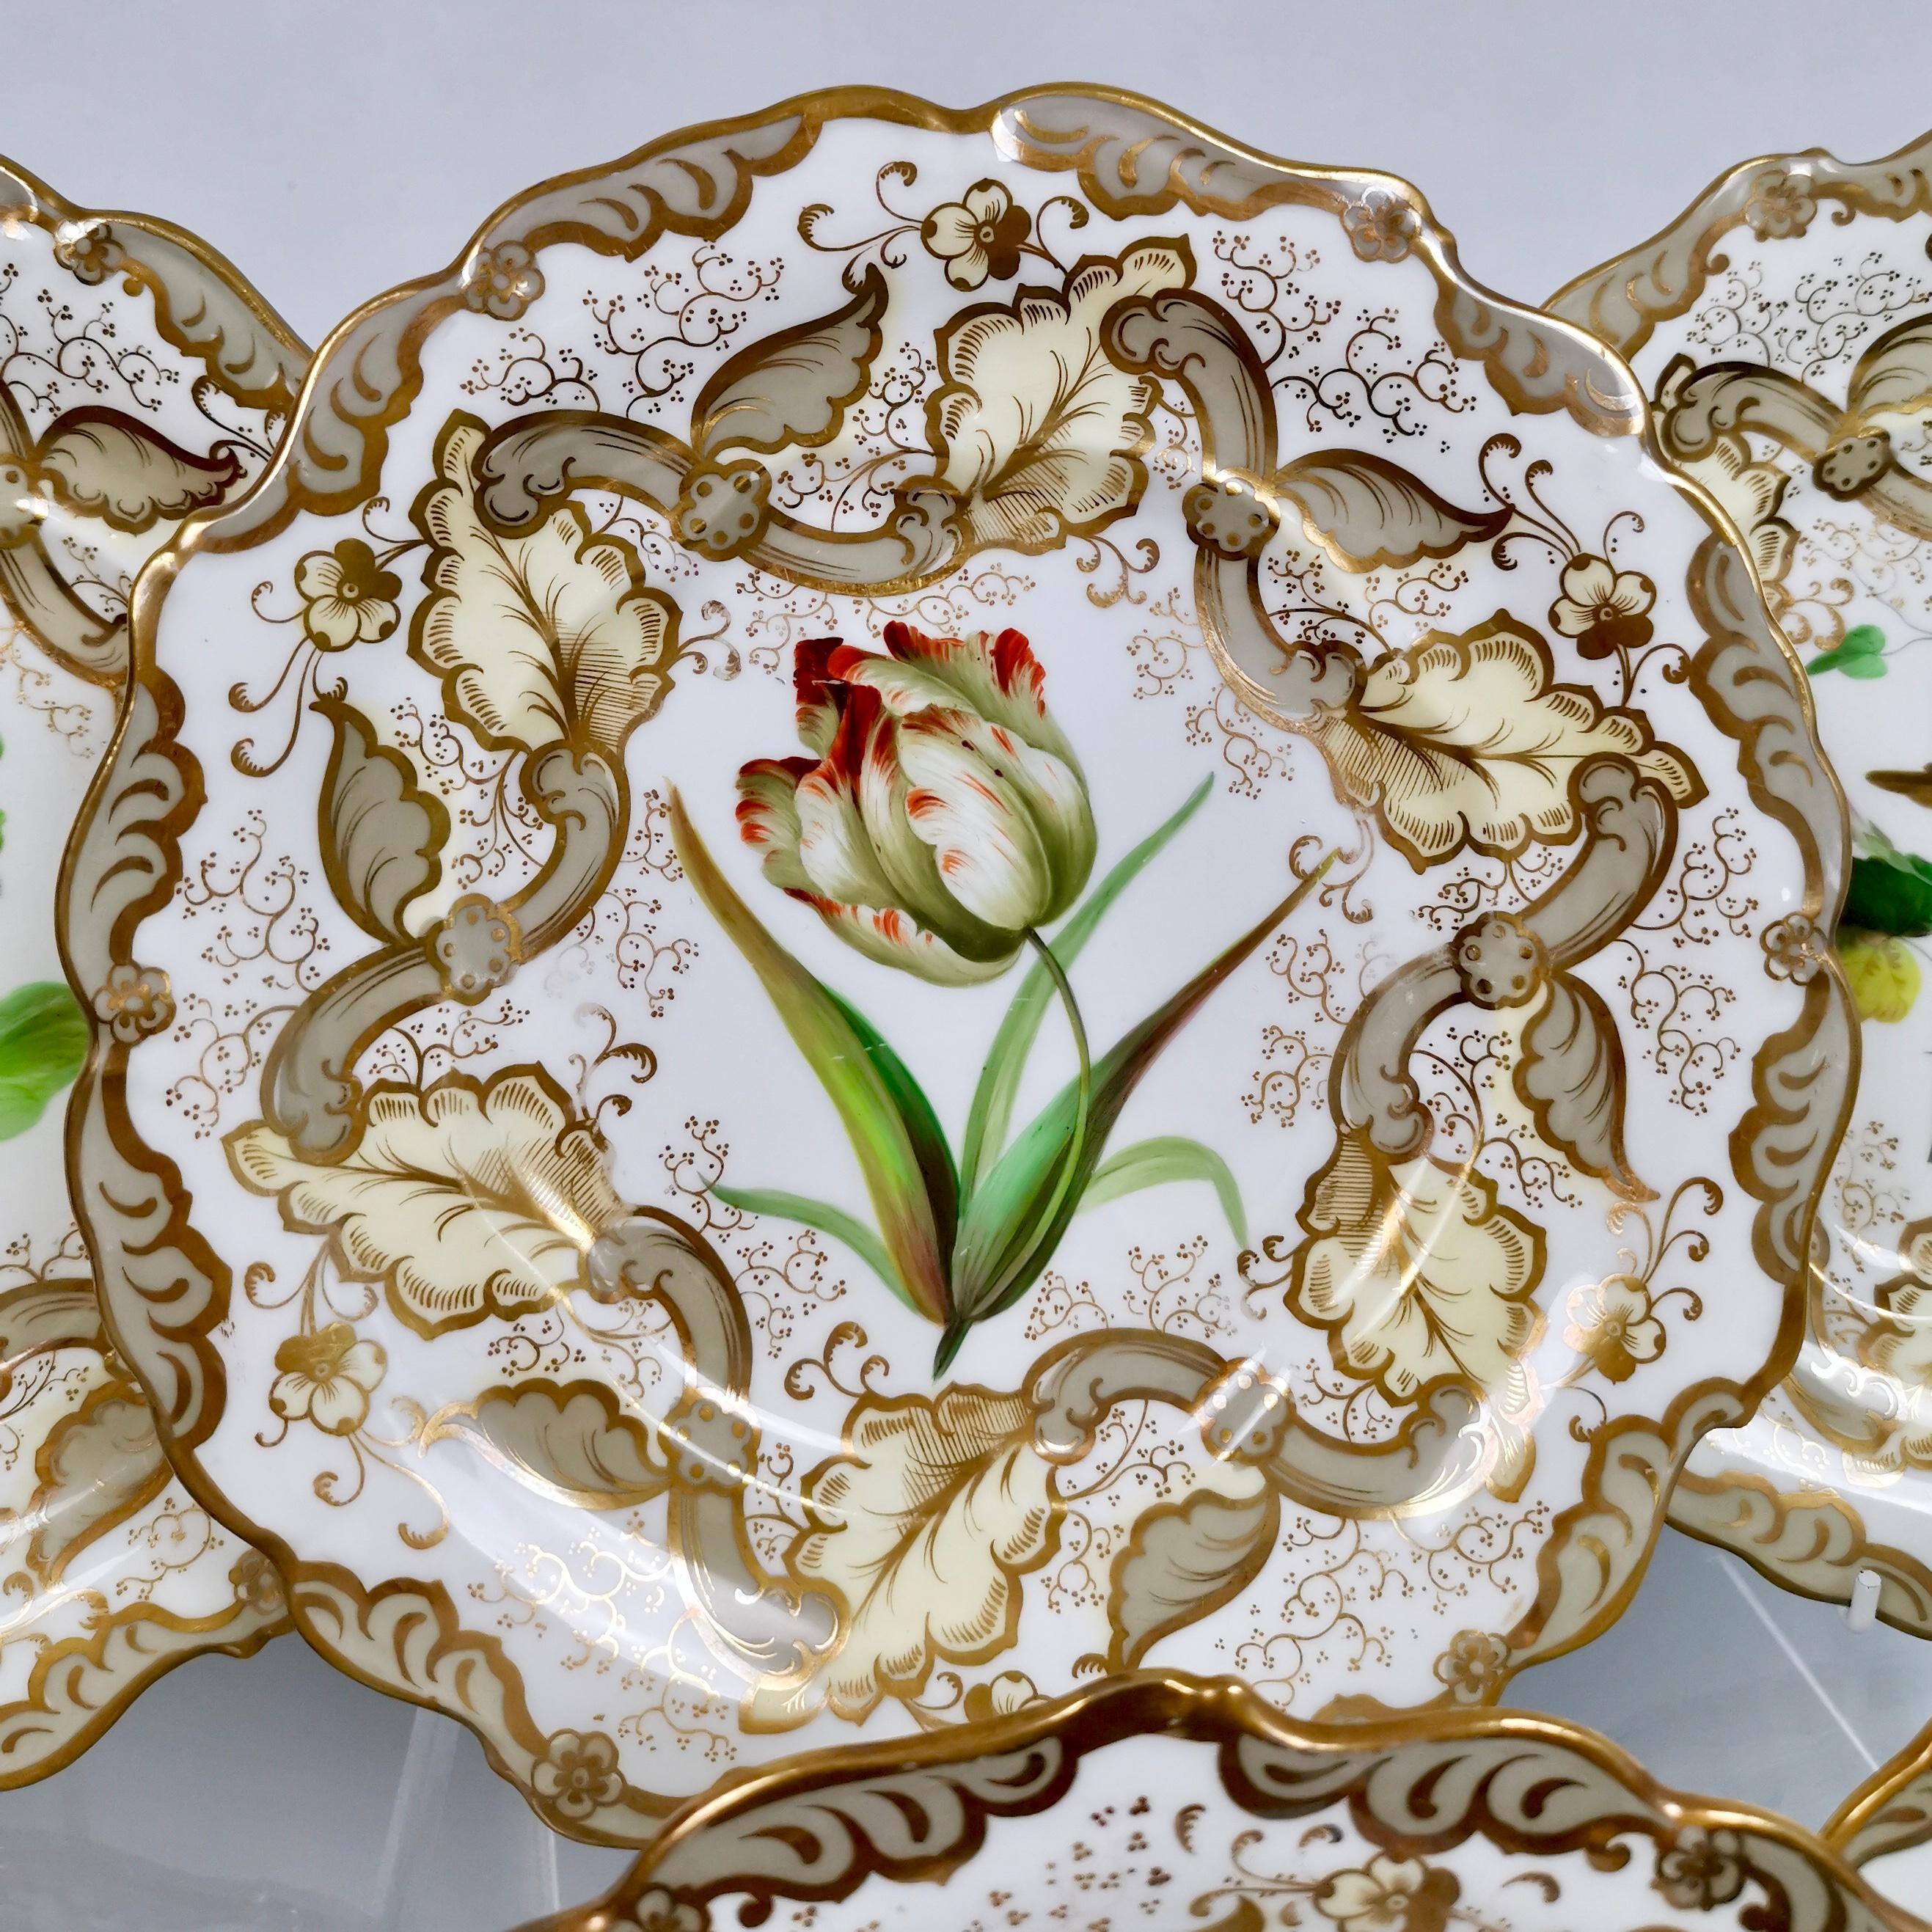 This is a beautiful set of 8 dessert plates made by Samuel Alcock in circa 1835-1840. The plates are unmarked except the pattern number 5259, but it is strongly believed that these were made by Samuel Alcock, based on the pattern number,